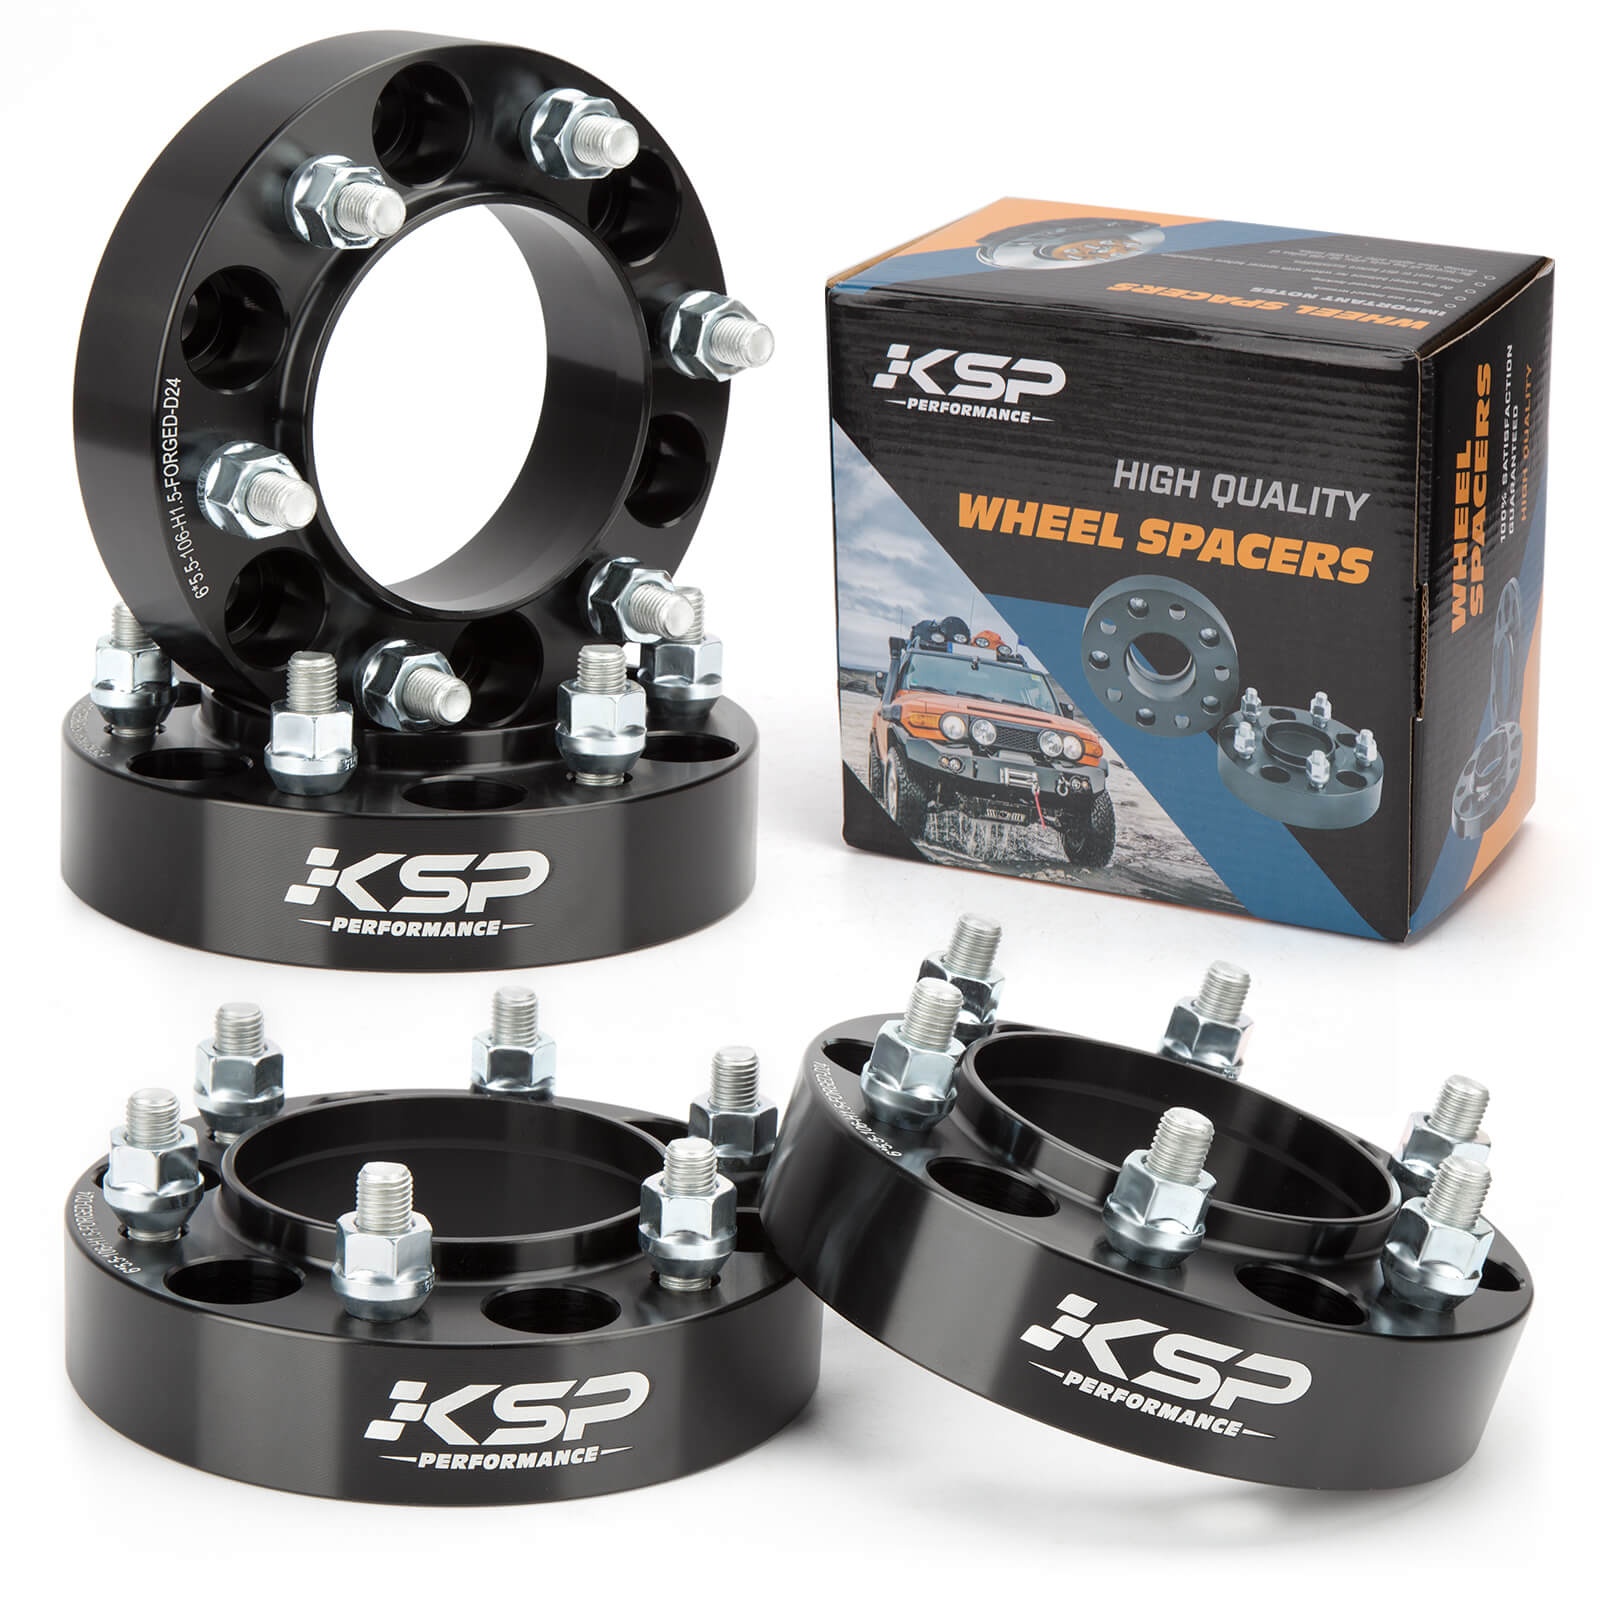 Wheel Spacers 1.5 inch 6x5.5" Hubcentric Forged For Toyota Tacoma 4Runner Tundra FJ Cruiser